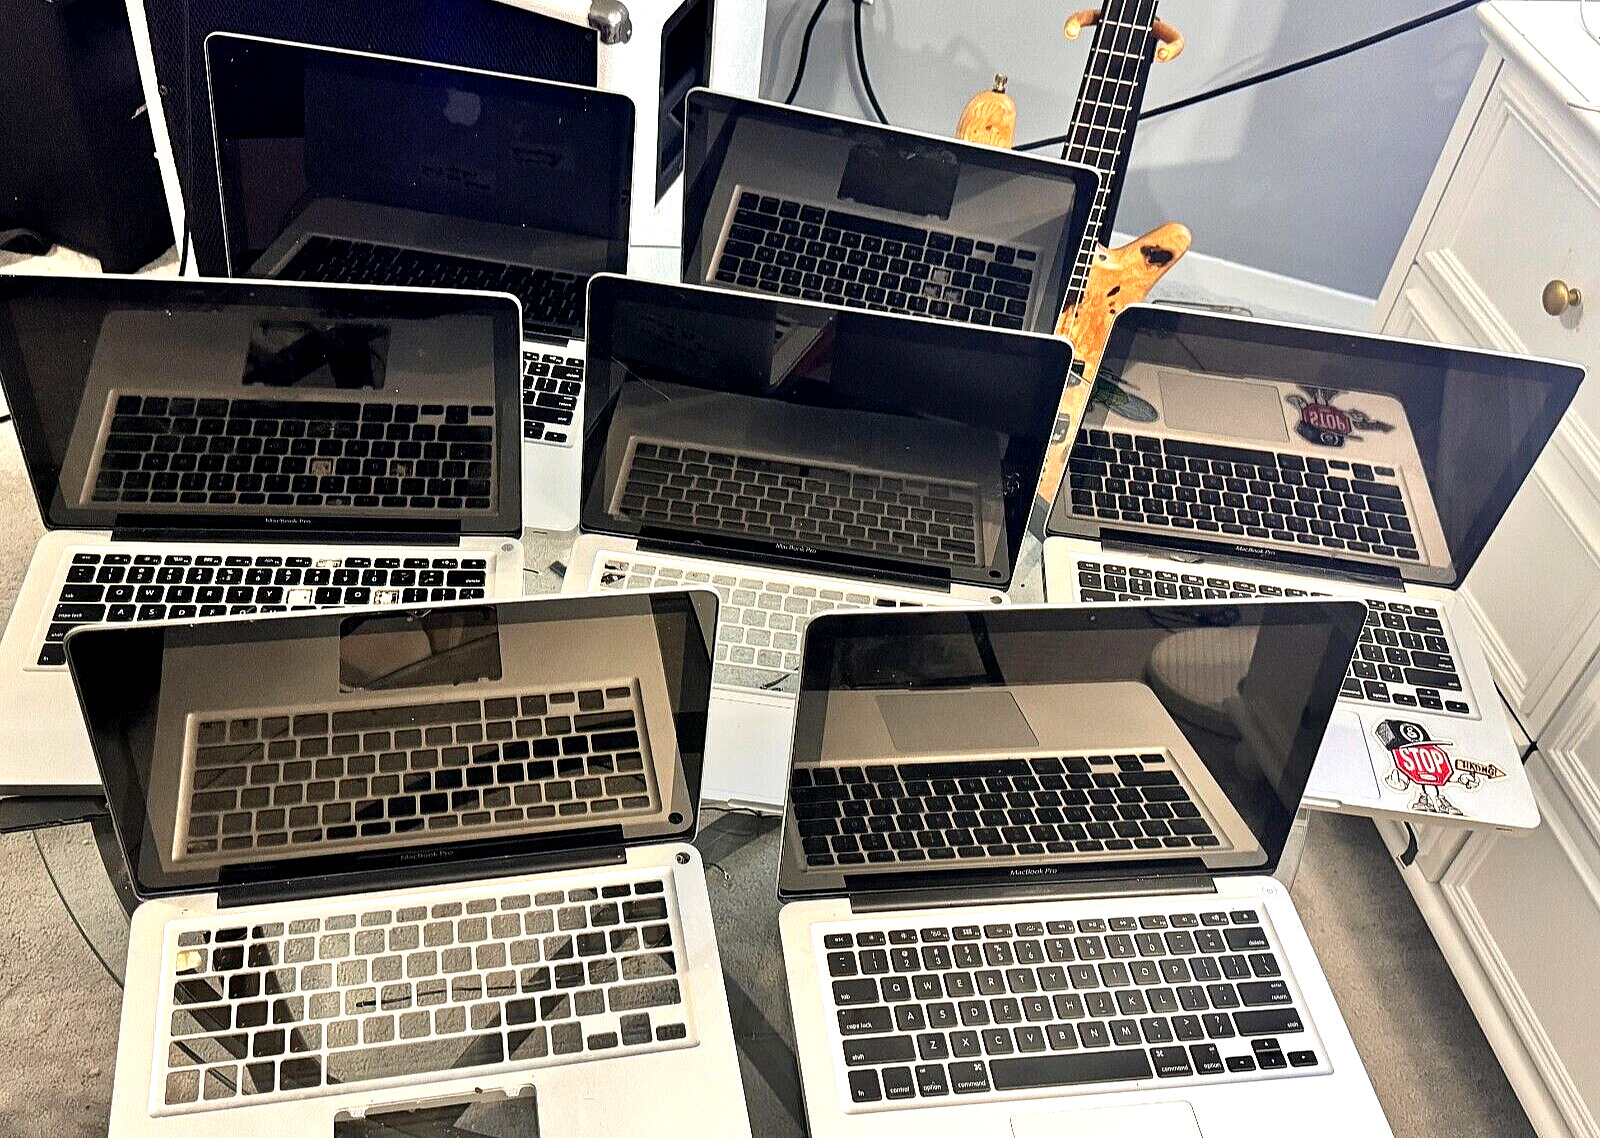 Lot of 7 Macbook Pro 2011 2012  LCD Display Screens + Housing Assembly for Parts